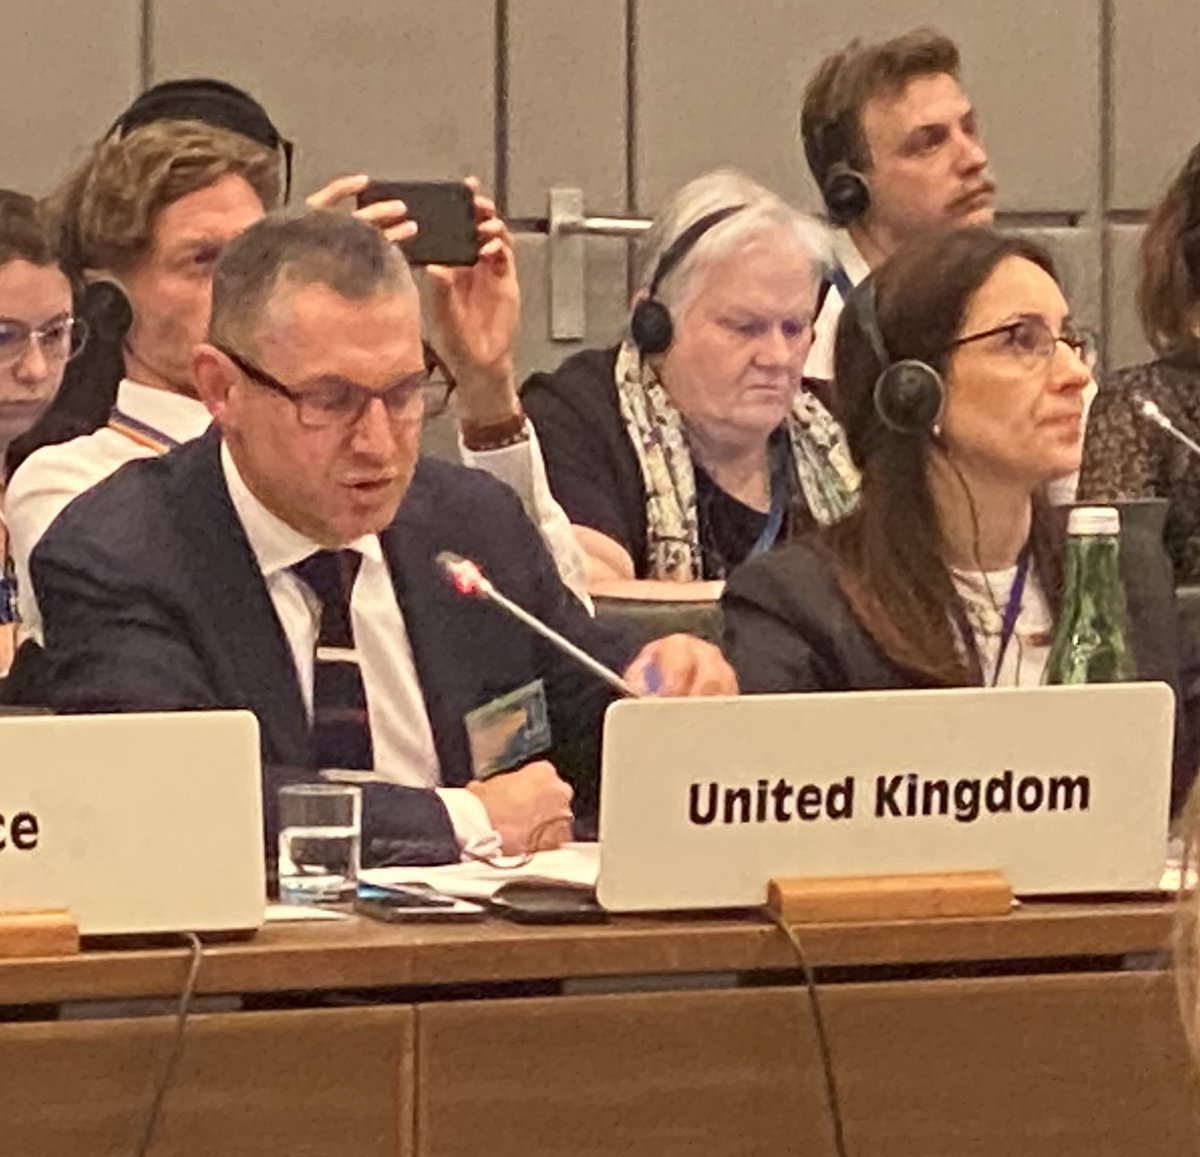 At #CTHB24, @UKMSlaveryEnvoy shares info on UK’s modern slavery programme, Work in Freedom, which prevents the trafficking of women and girls and has generated a rich body of evidence on tackling the drivers of exploitation. Full statement➡️ gov.uk/government/spe…